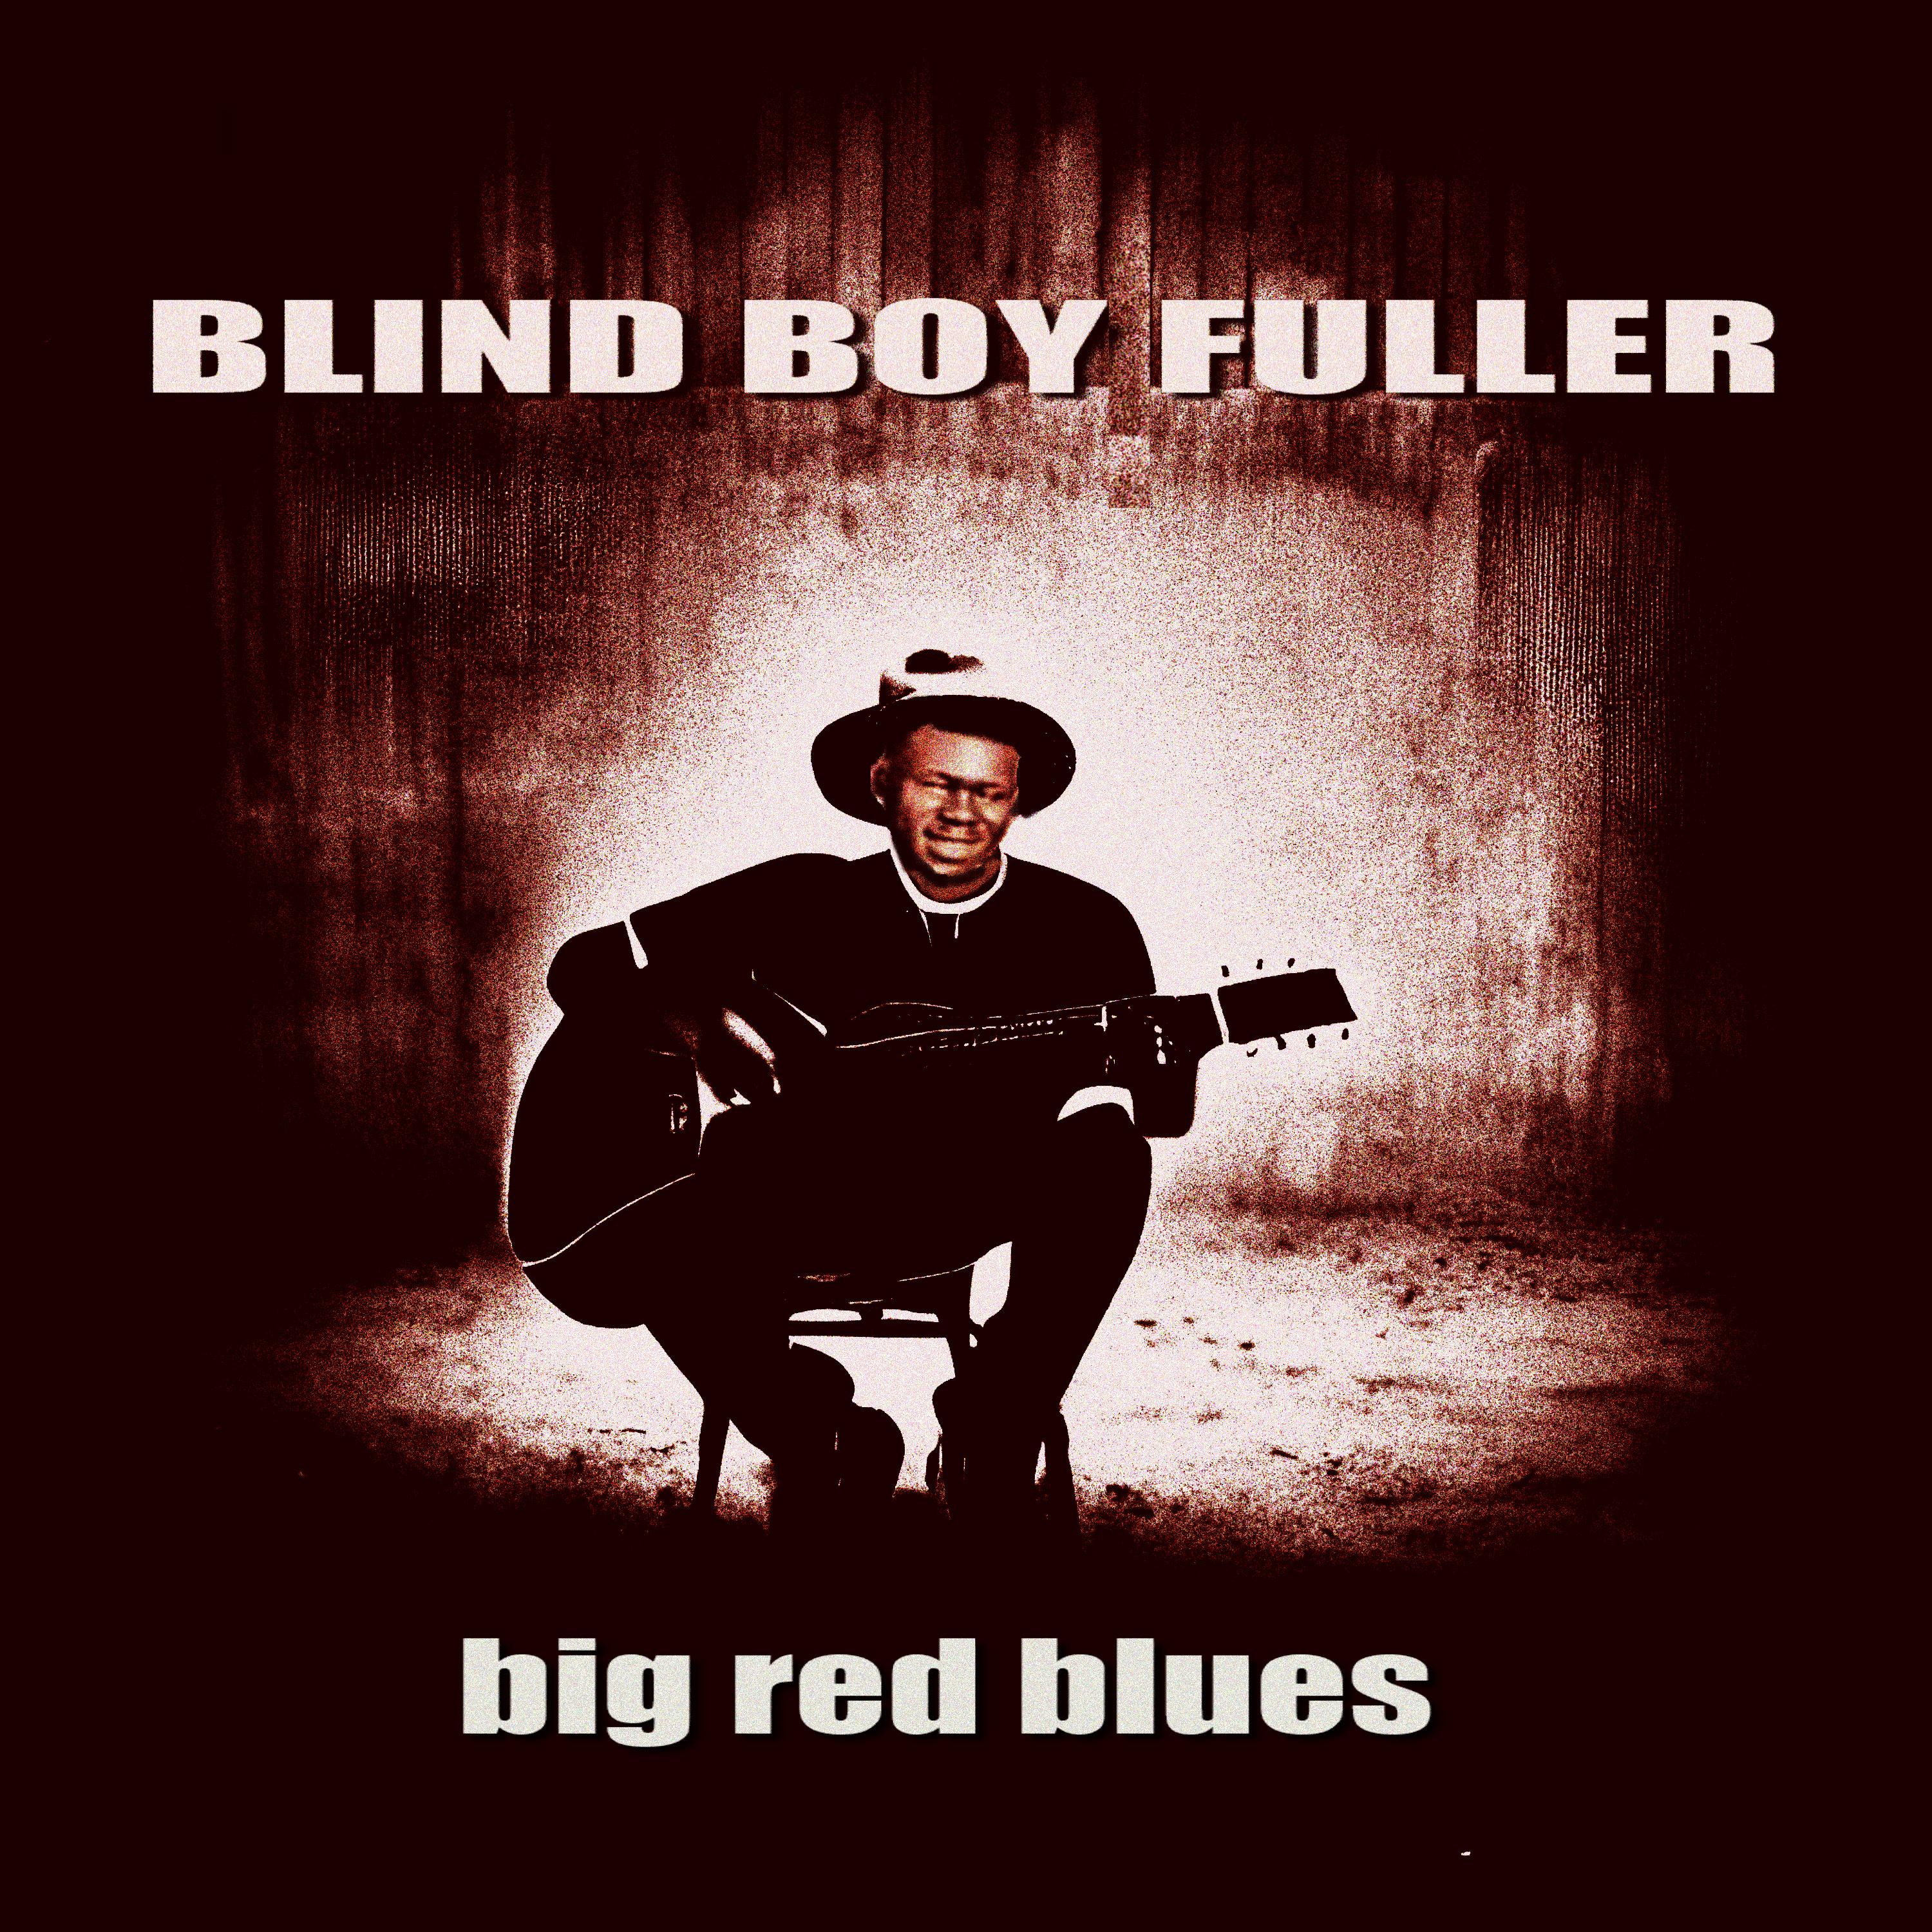 Blind Boy Fuller - Blue and Worried Man (feat. Sonny Terry)